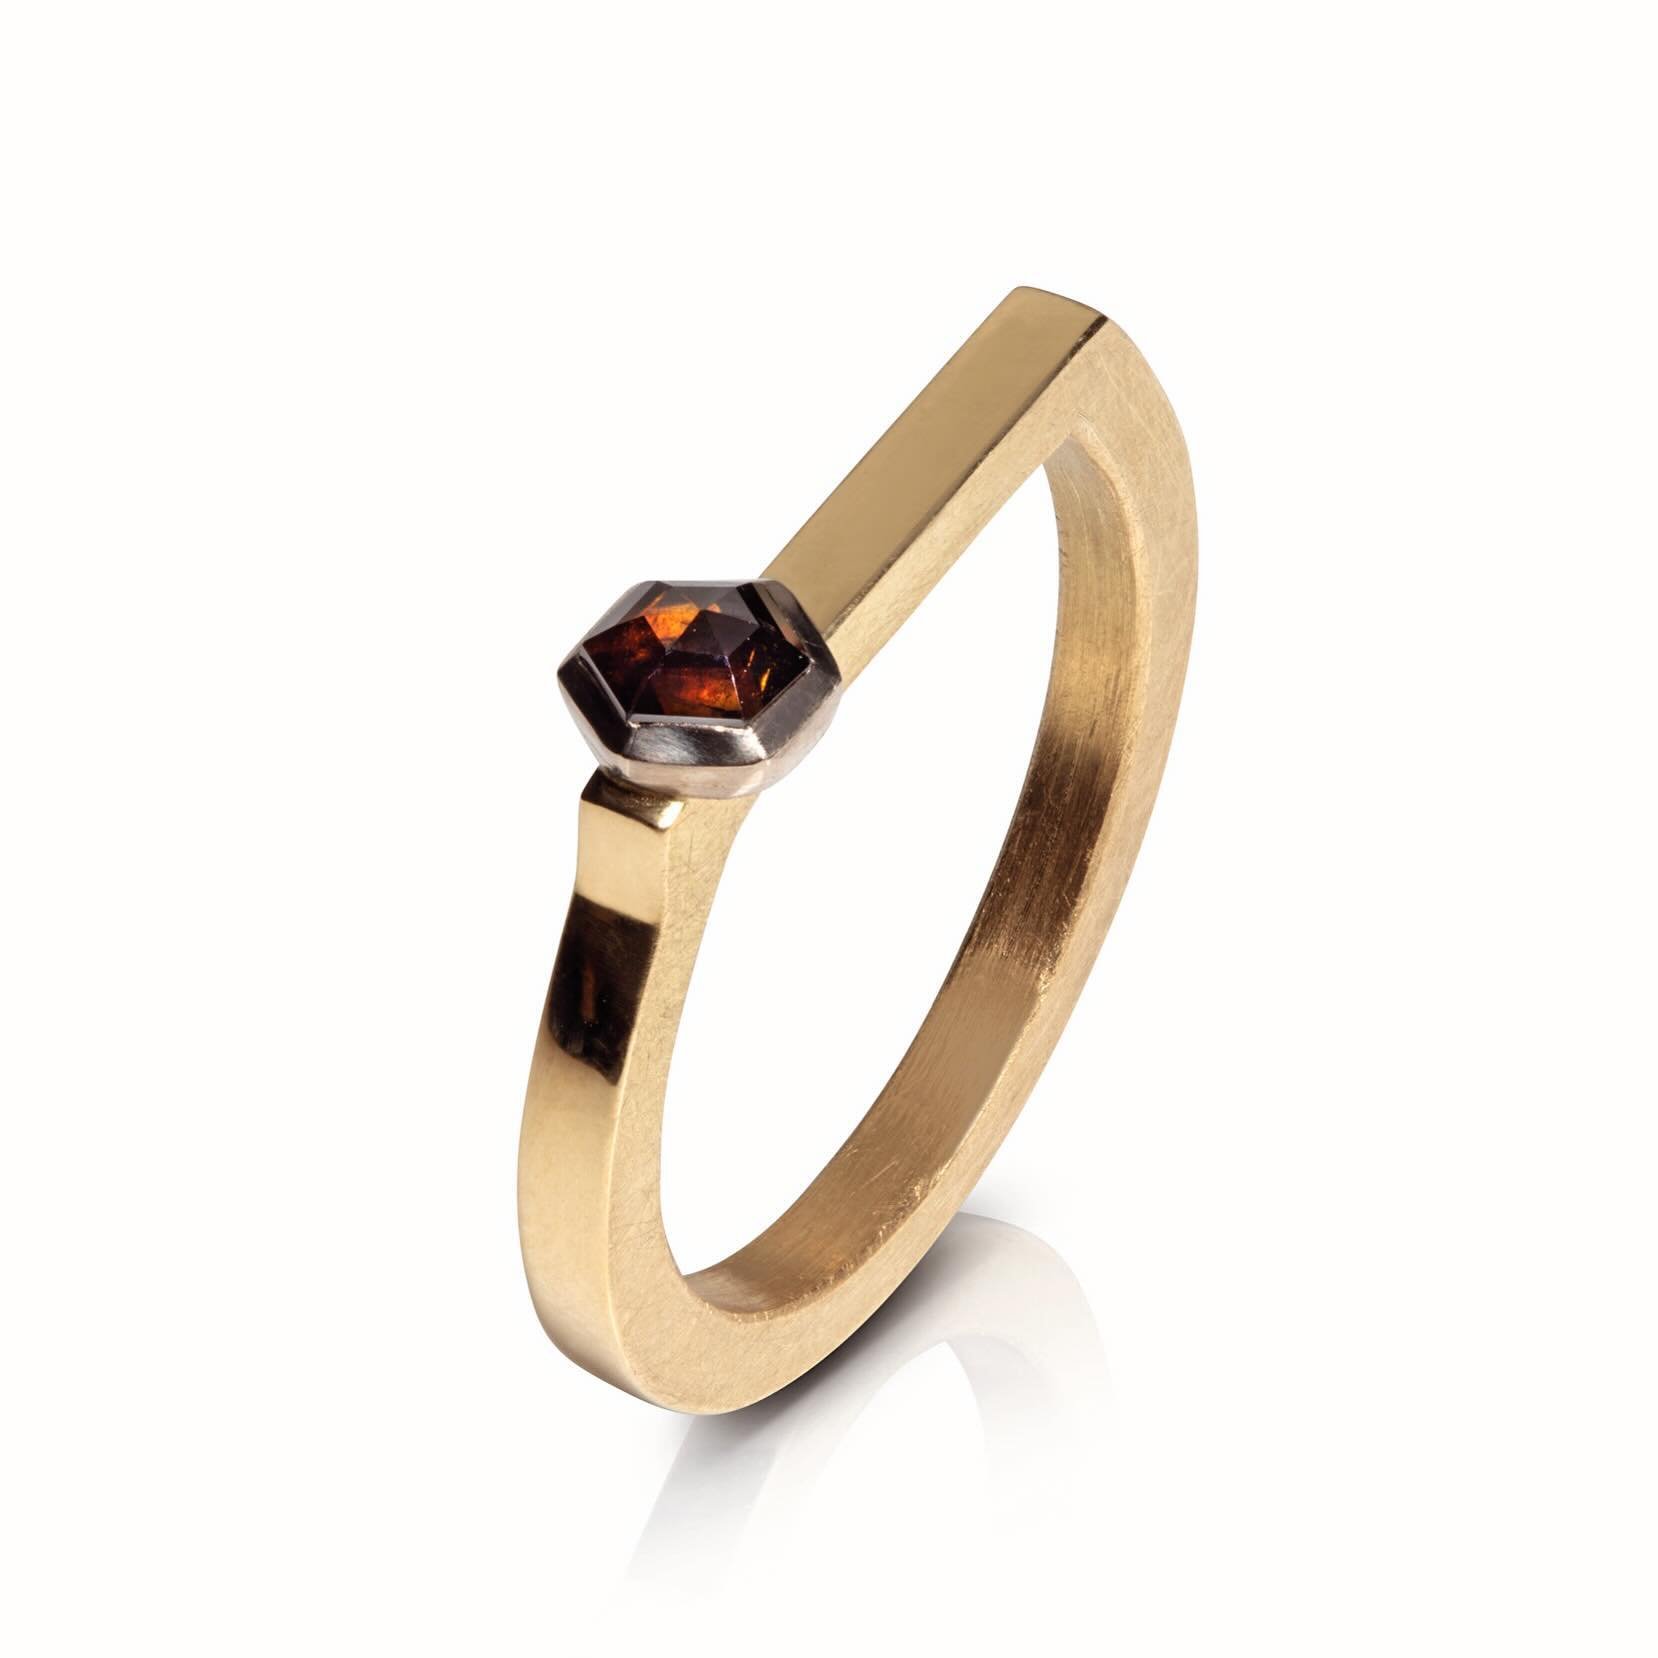 One-off Celestial ring with cognac hexagon diamond.
Now on my website. 
Come and try it on in my studio in the garden! 
.
.
.
More new work to come&hellip;
.
.
.
#hattongardenbespoke #minimalist #minimalstyle #celestial #goldrings #oneoffring #minima